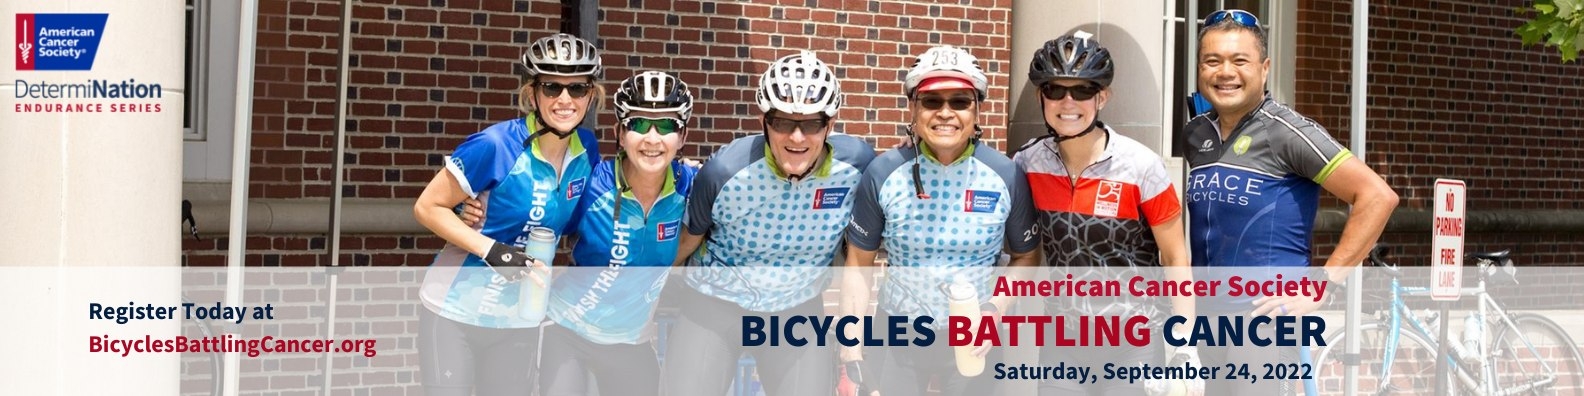 Eastern Mountain Sports Partners with American Cancer Society 
For Bicycles Battling Cancer Event
